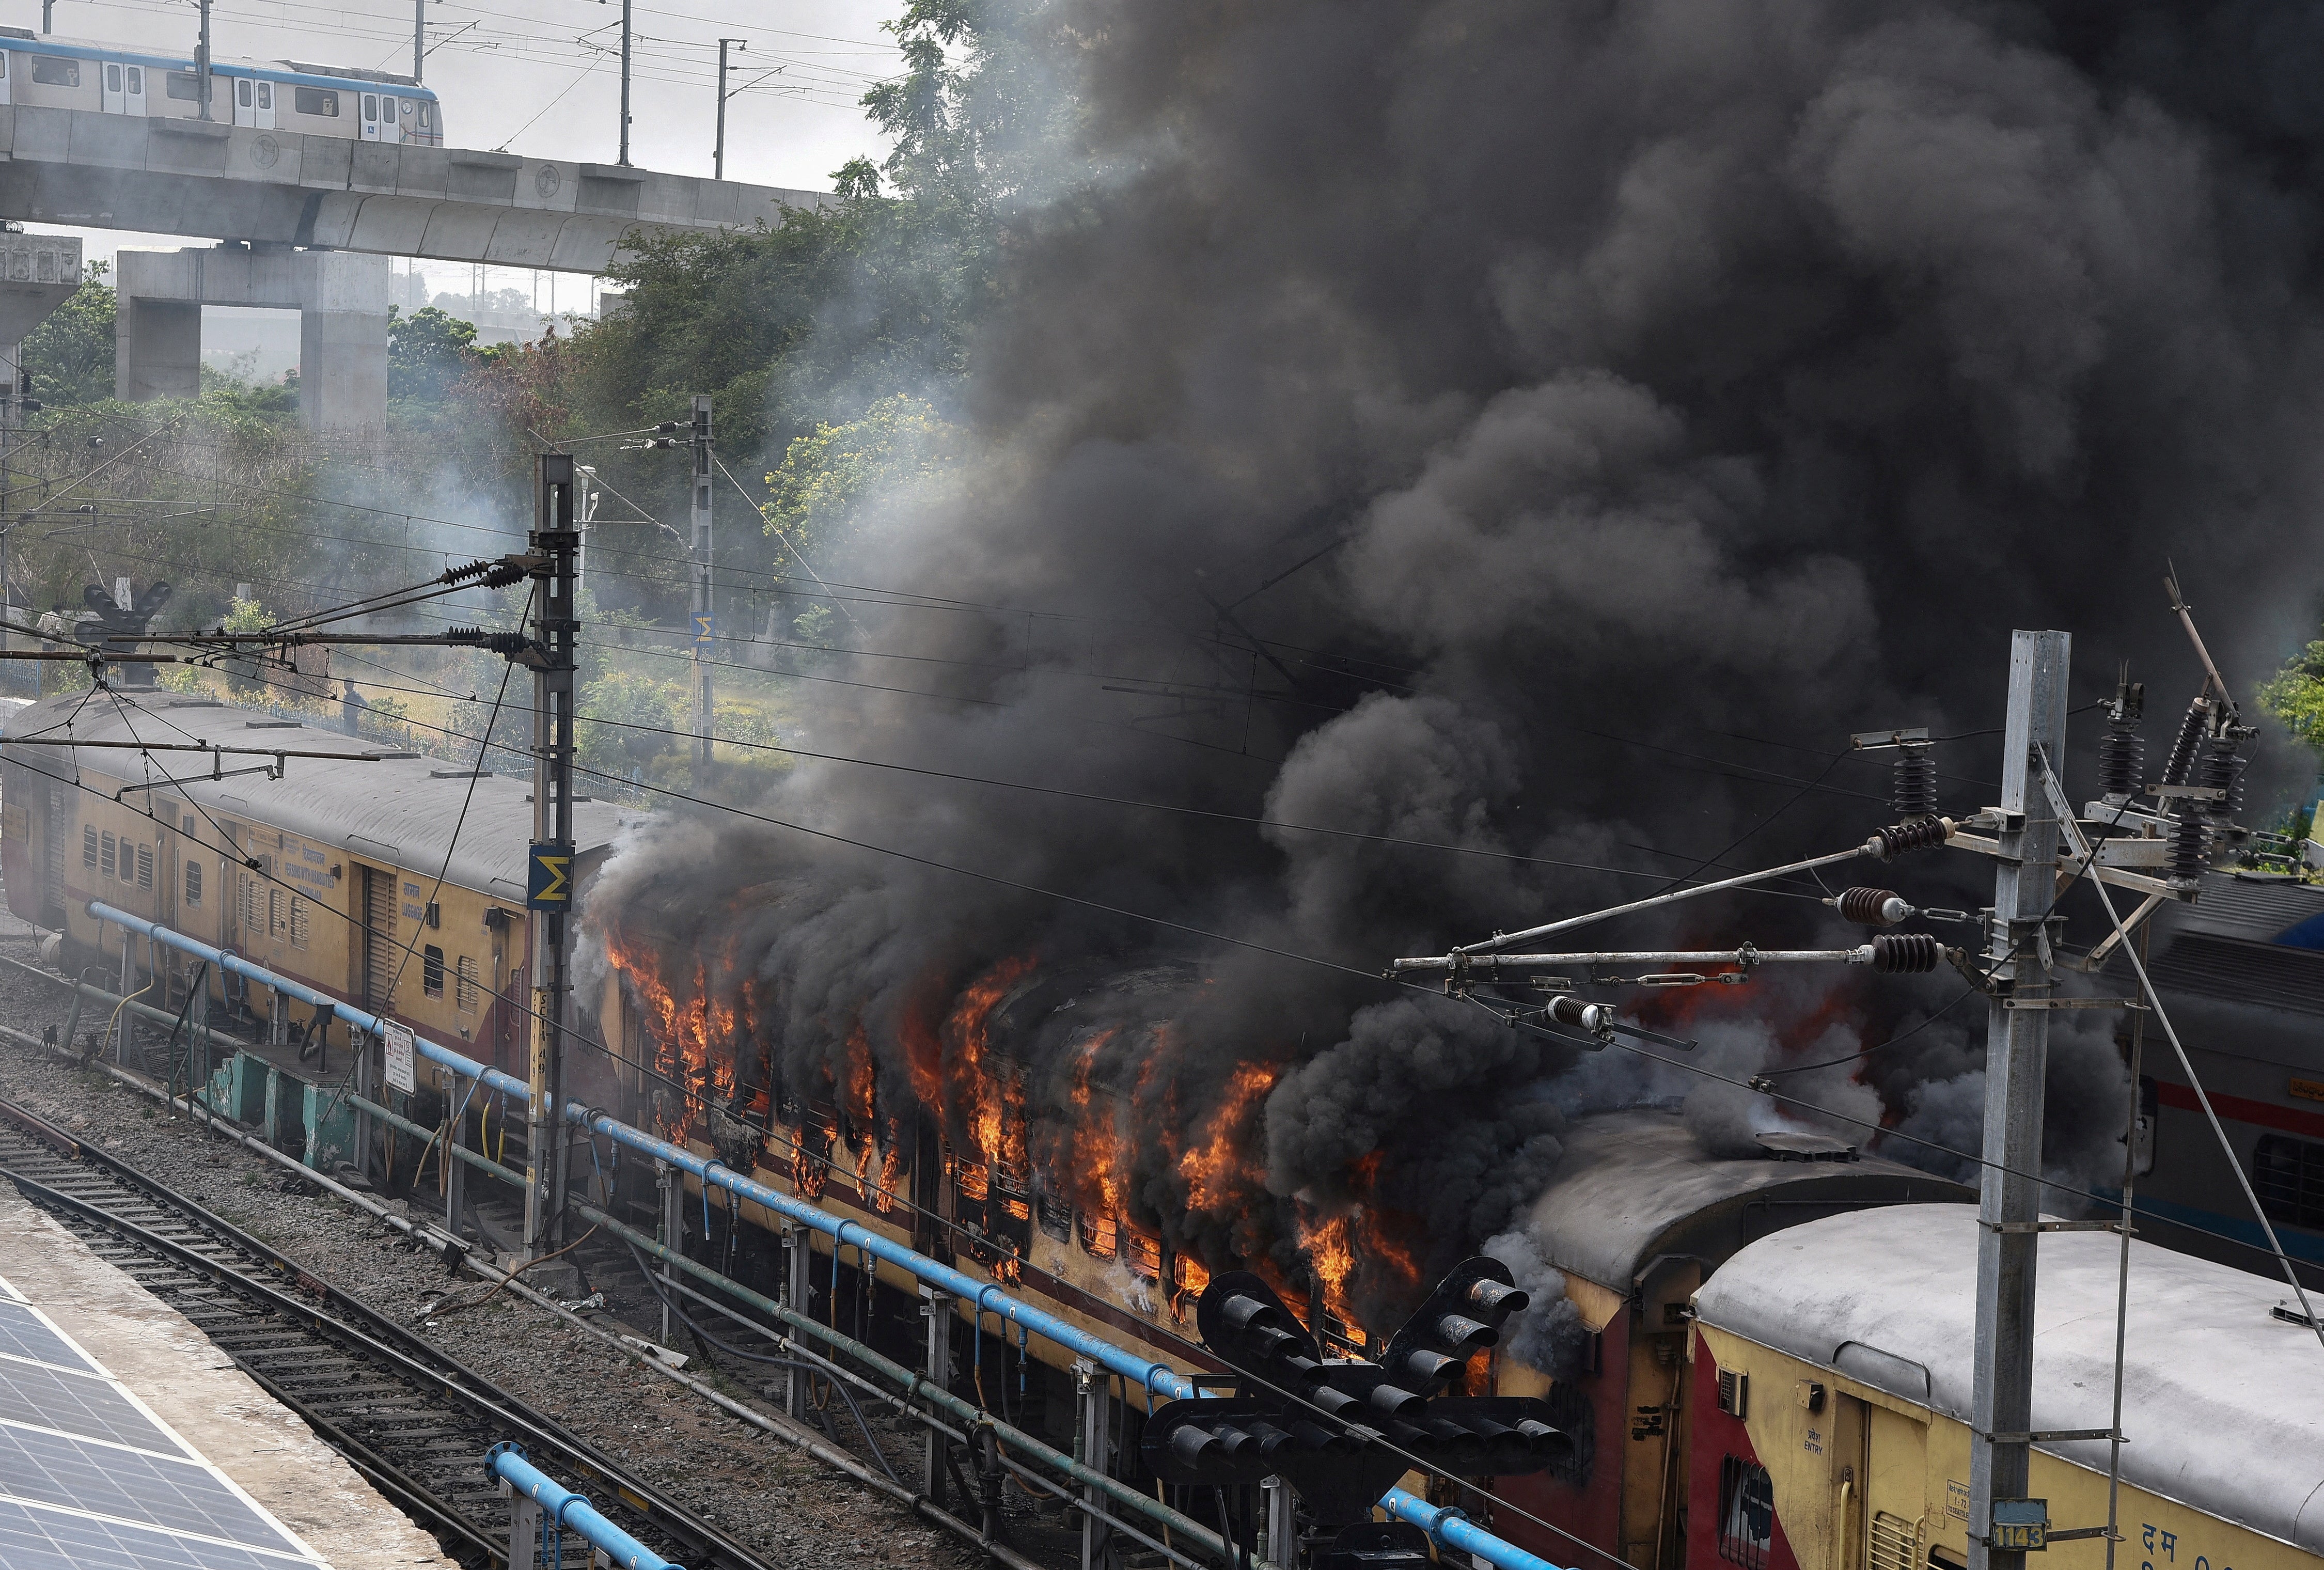 Protesters set fire to a train in protest in the southern state of Telangana